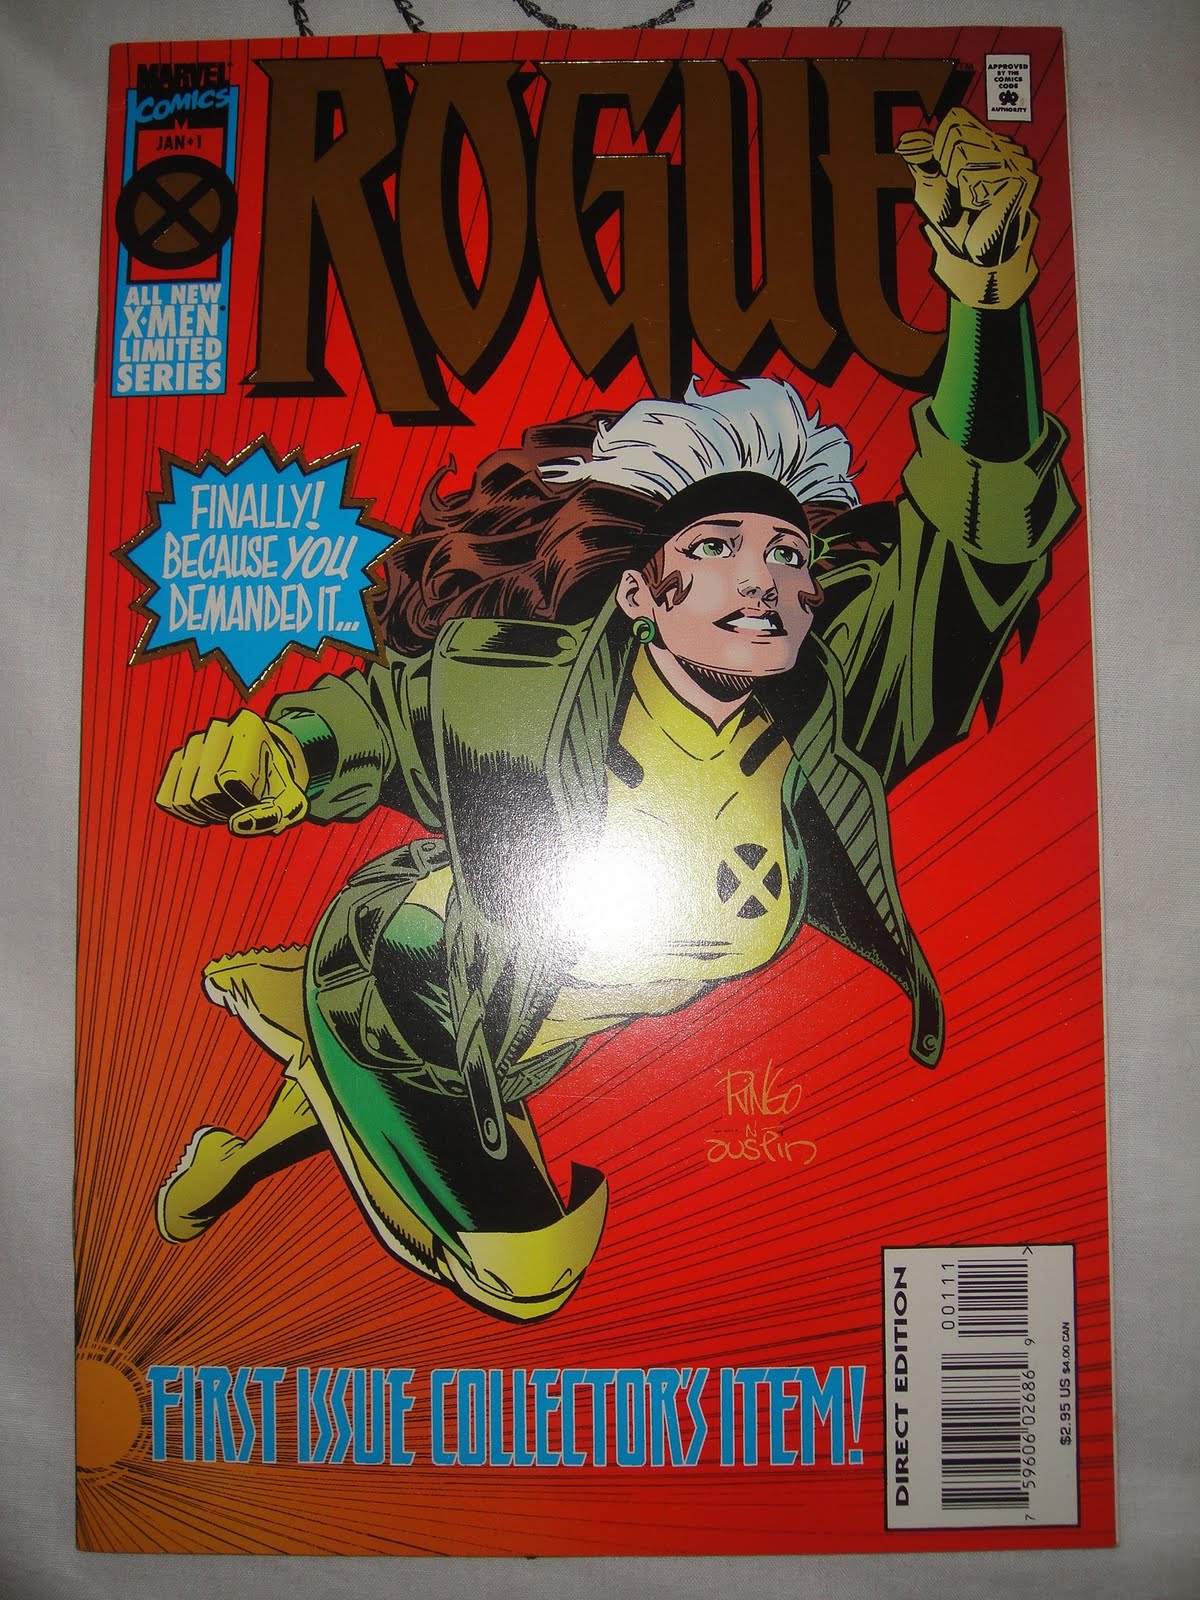 Malaysia Jumble S@le: Marvel Comic: Rogue - 1st Issue Collector's Item!!!